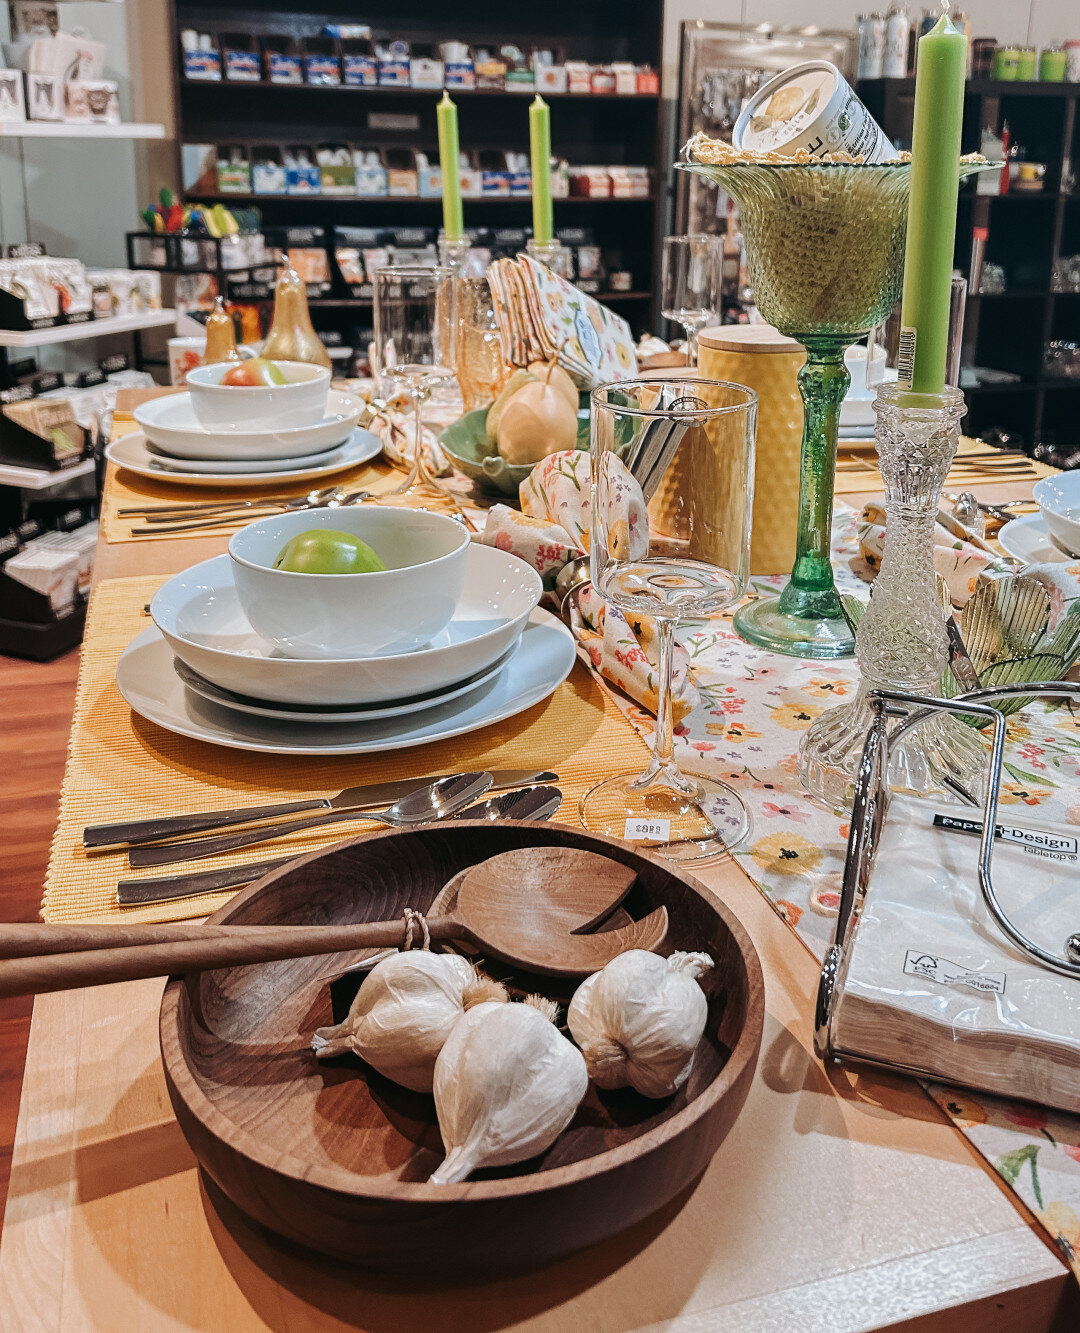 Planning your spring social table scape?☂️💐⛅ 
Don't miss out on the beautiful pieces at Decor8!